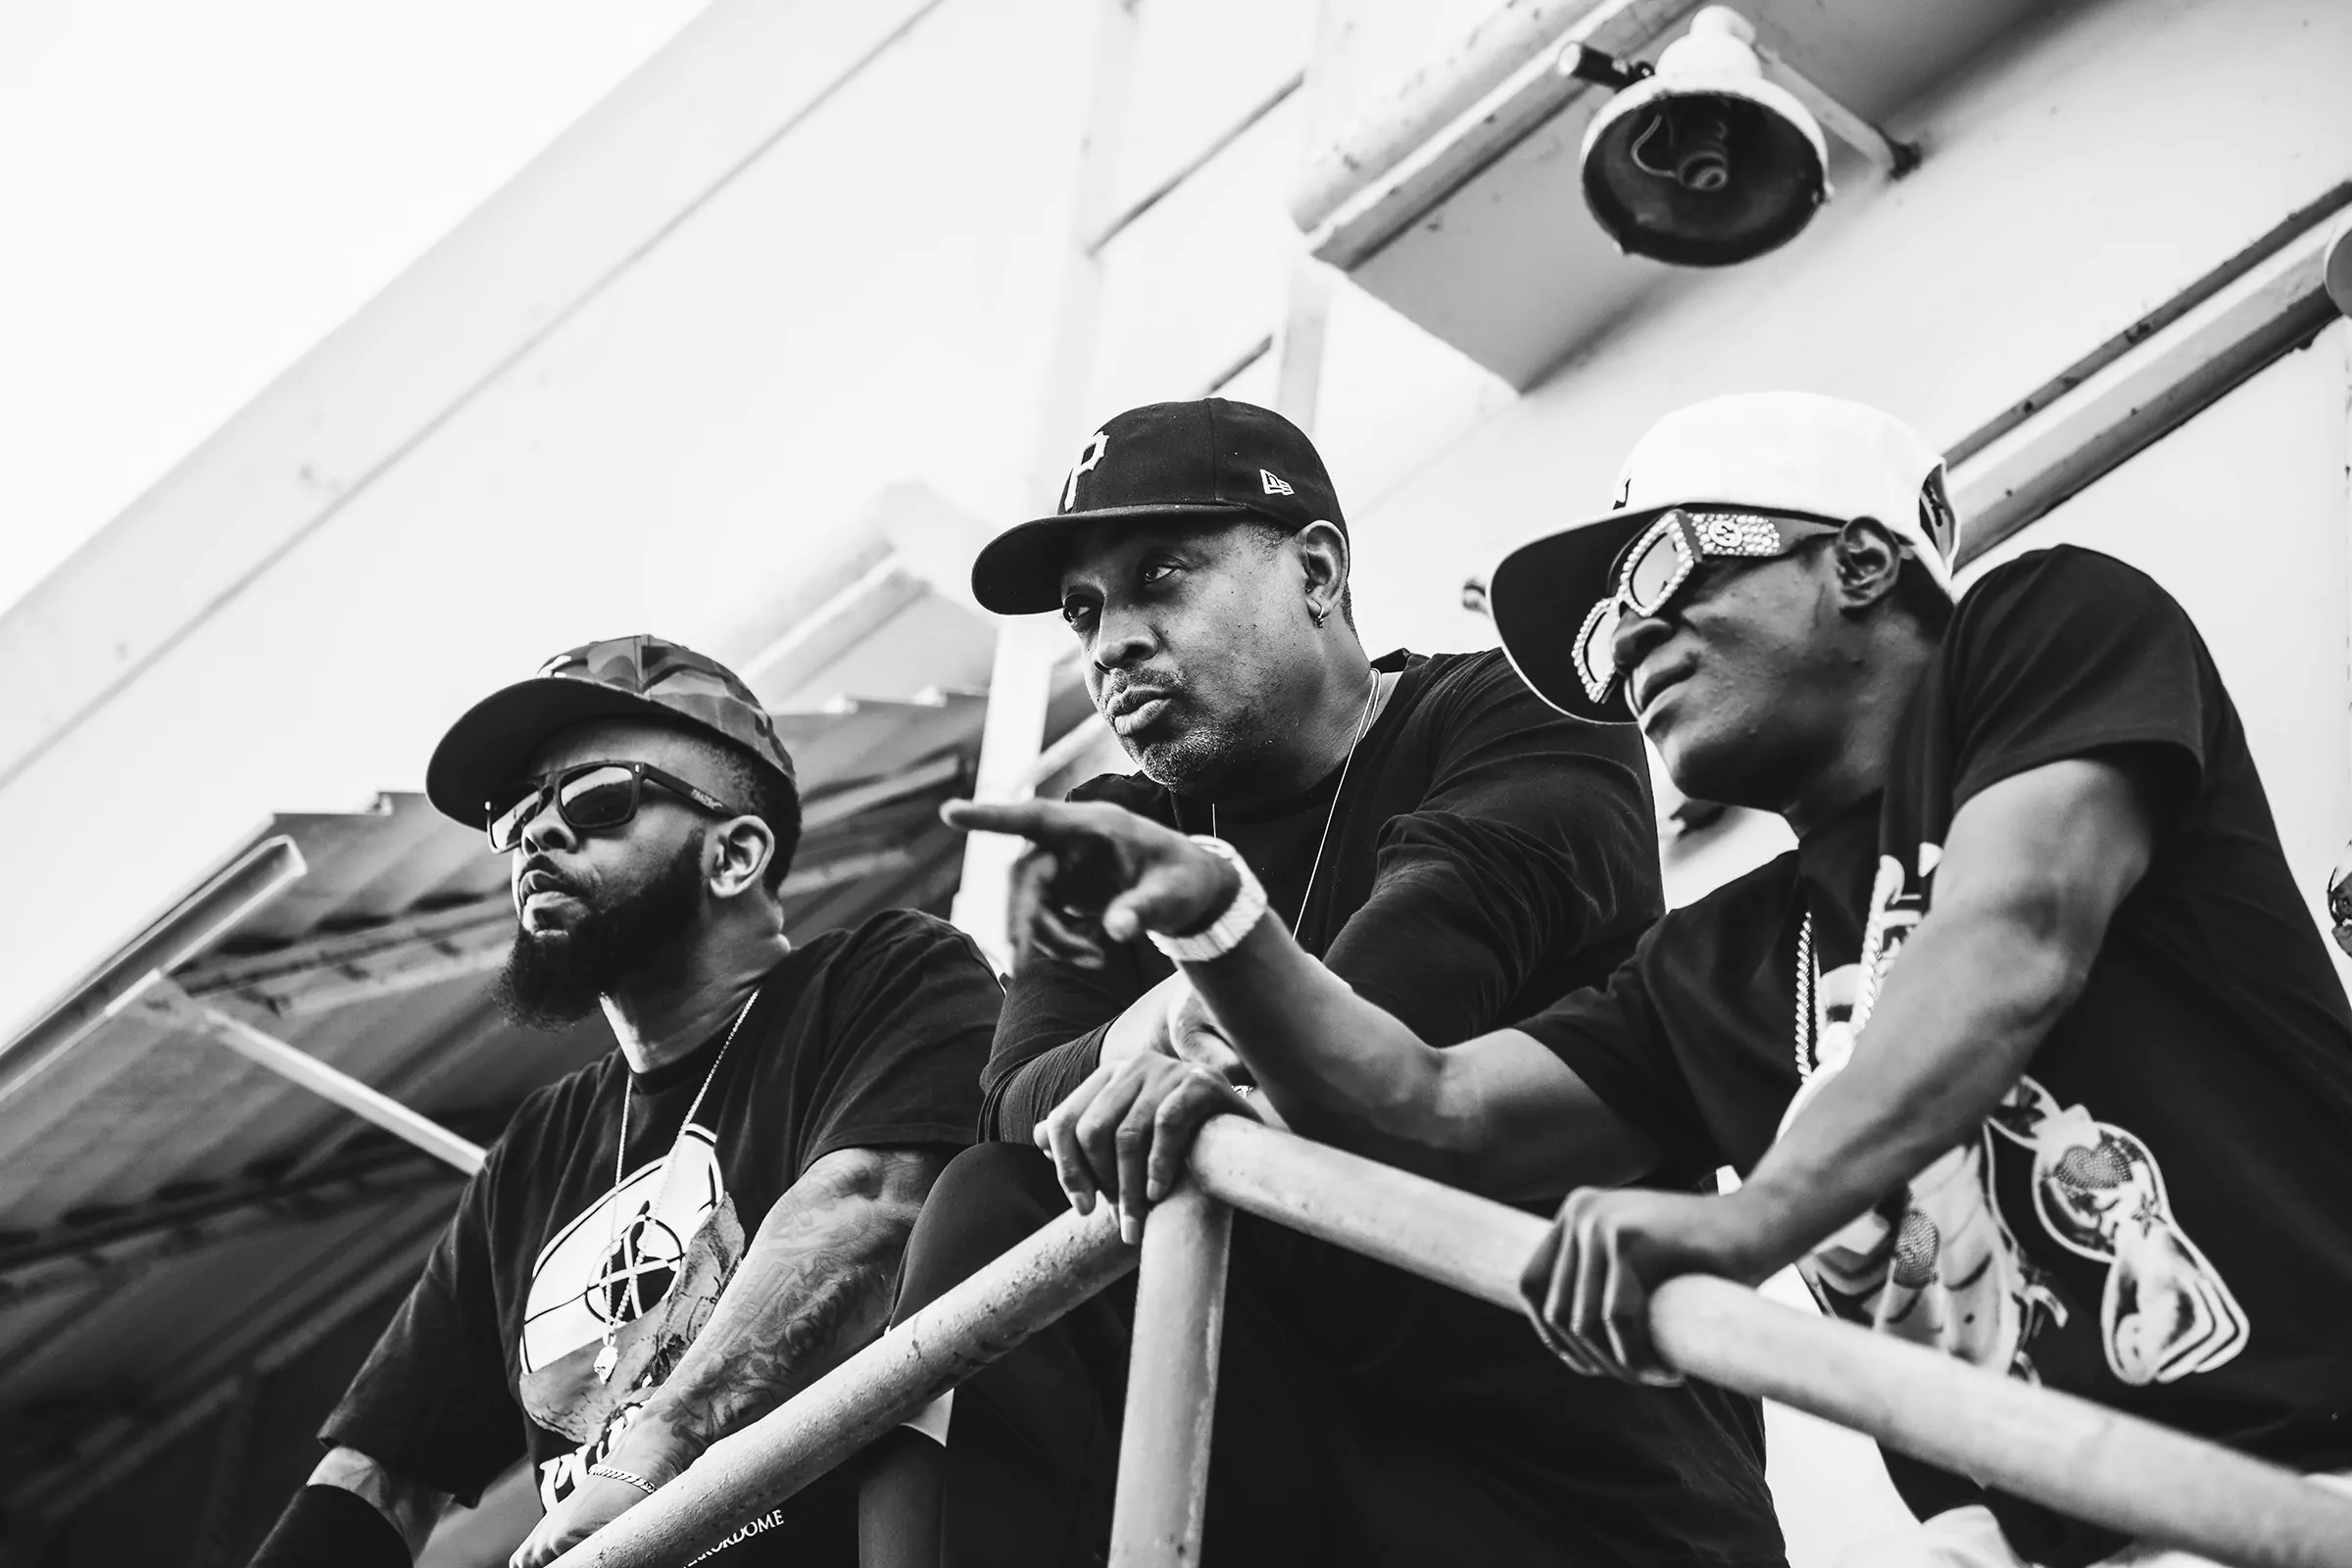 PUBLIC ENEMY shares new animated video ft. Beastie Boys’ Ad Rock & Mike D and Run DMC